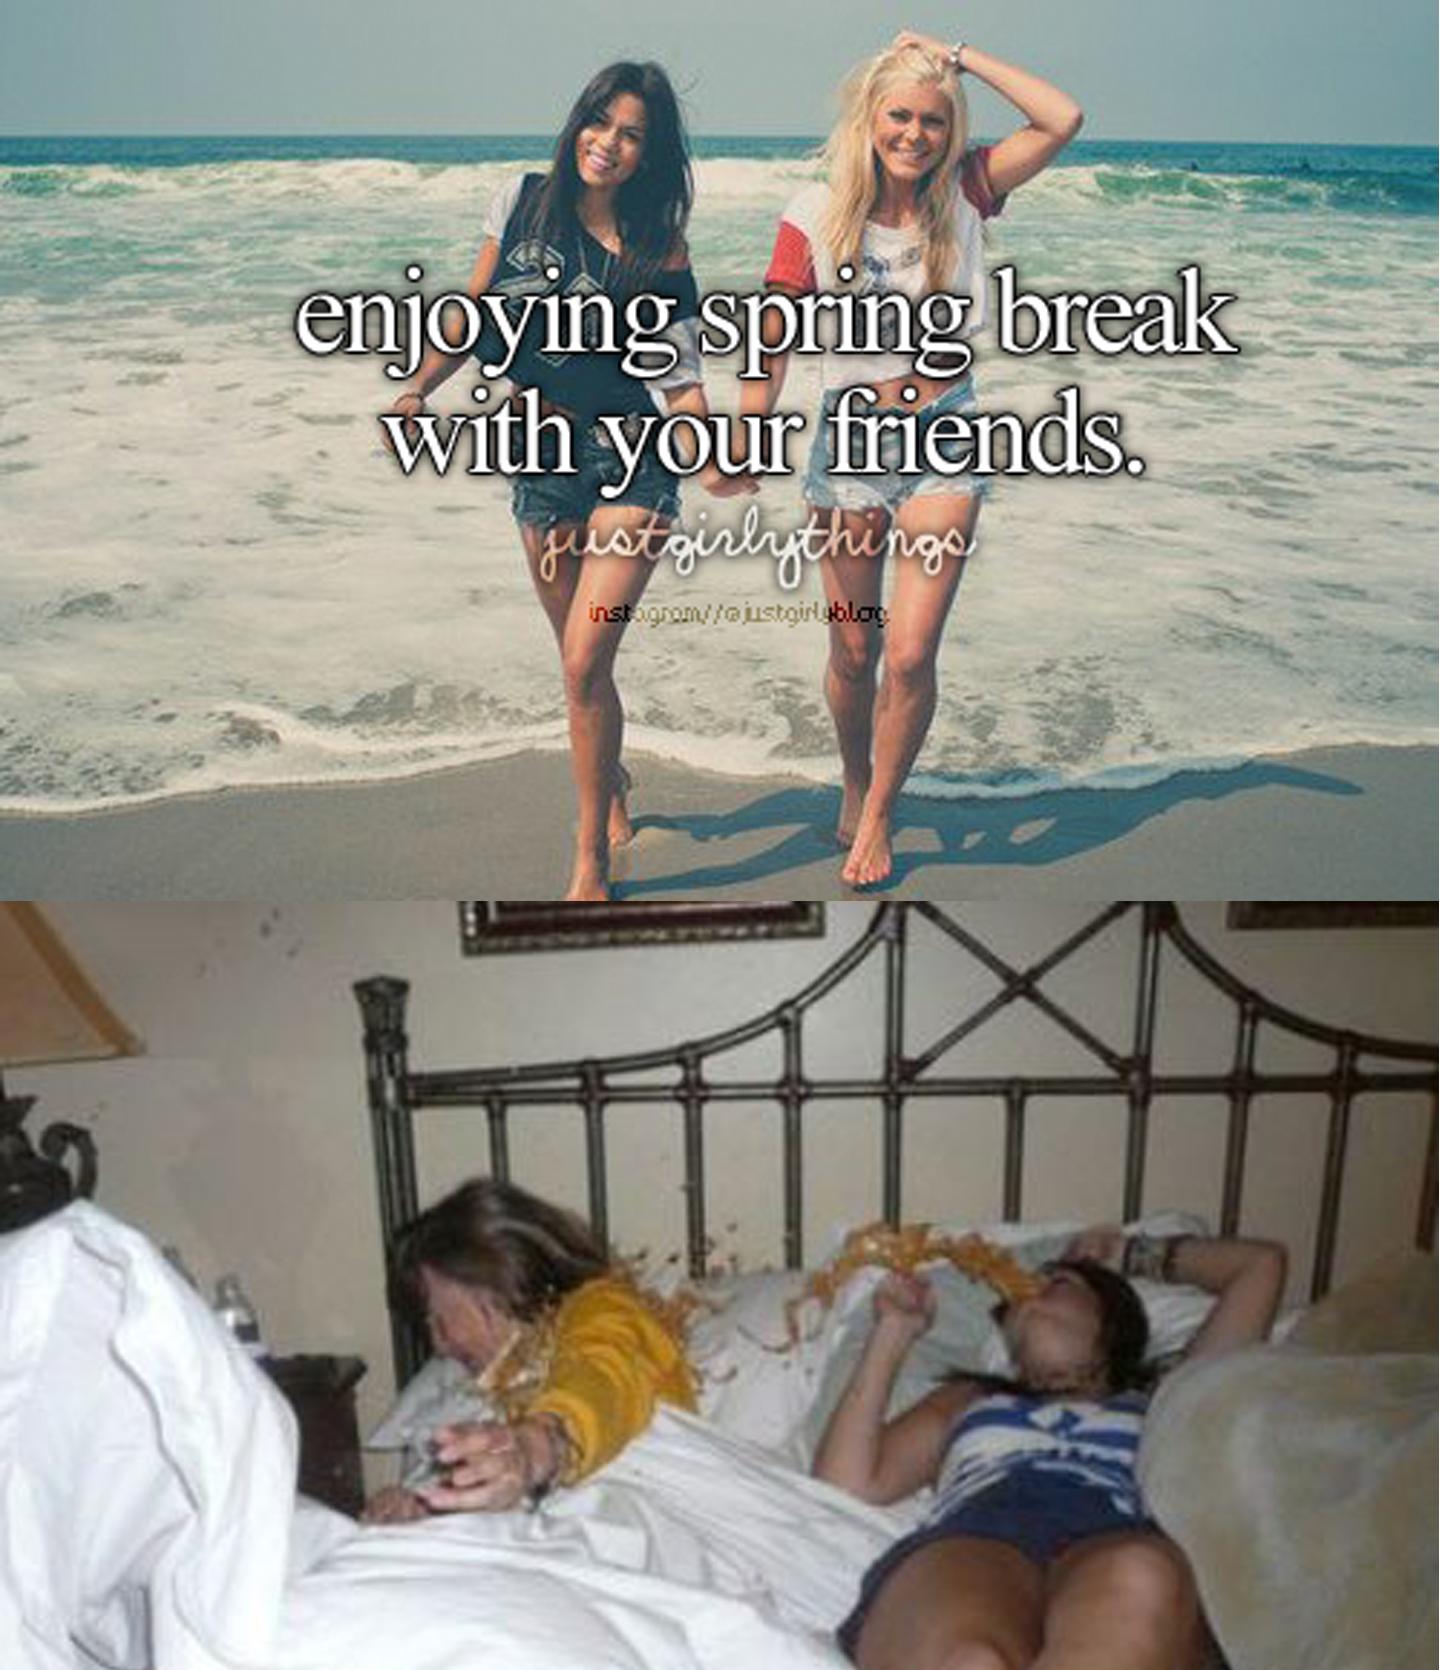 Girly things so accurate